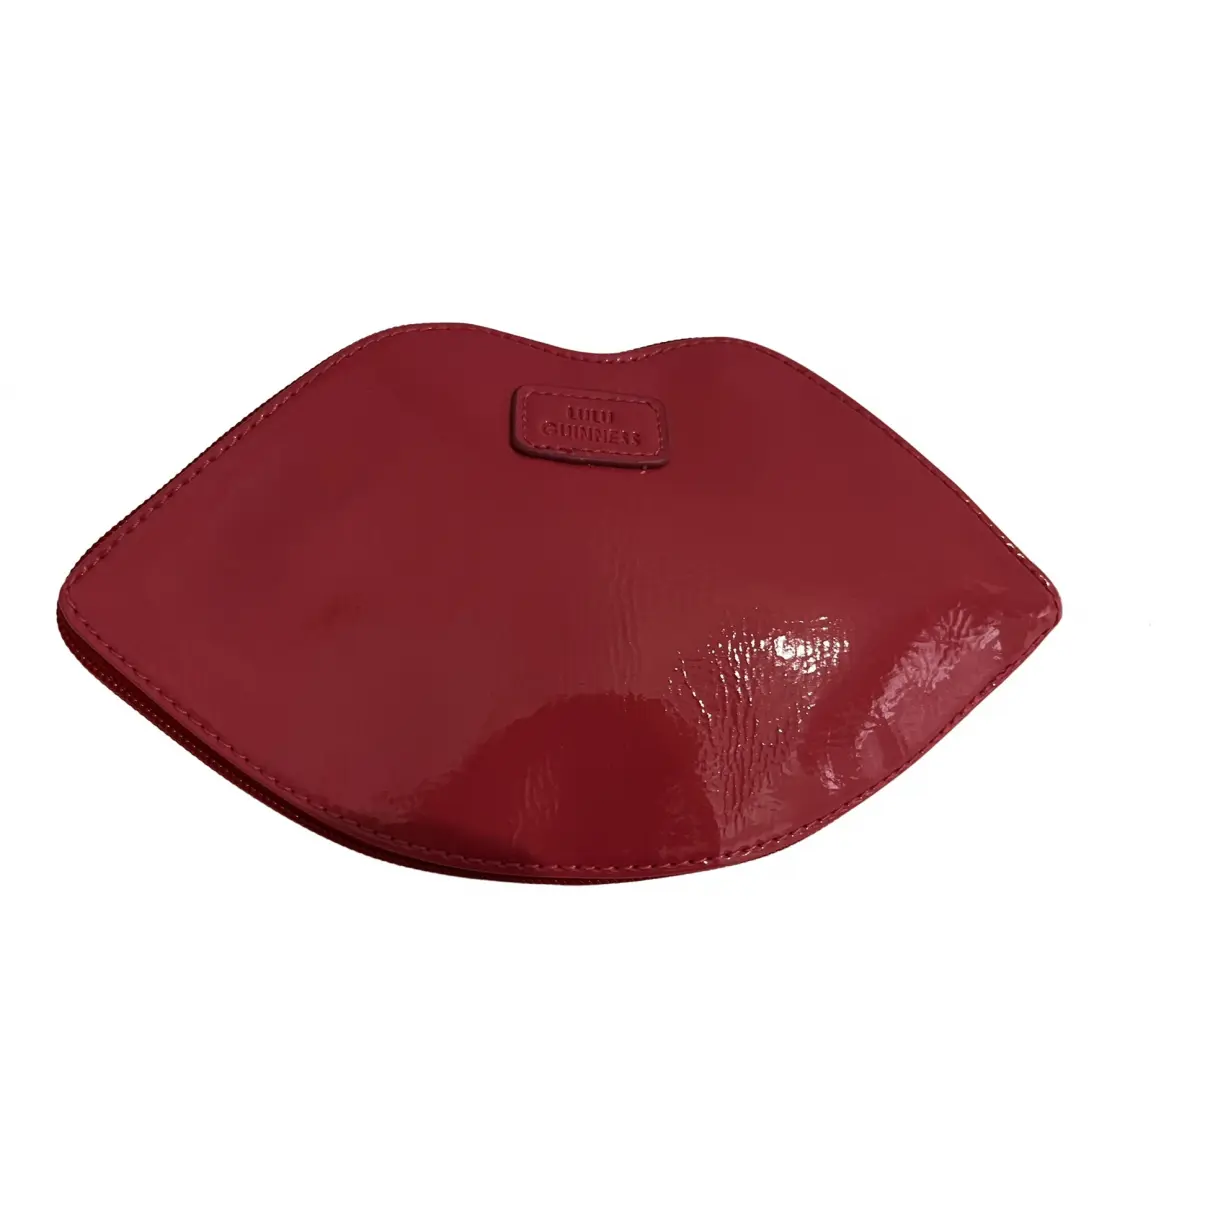 Patent leather tote Lulu Guinness